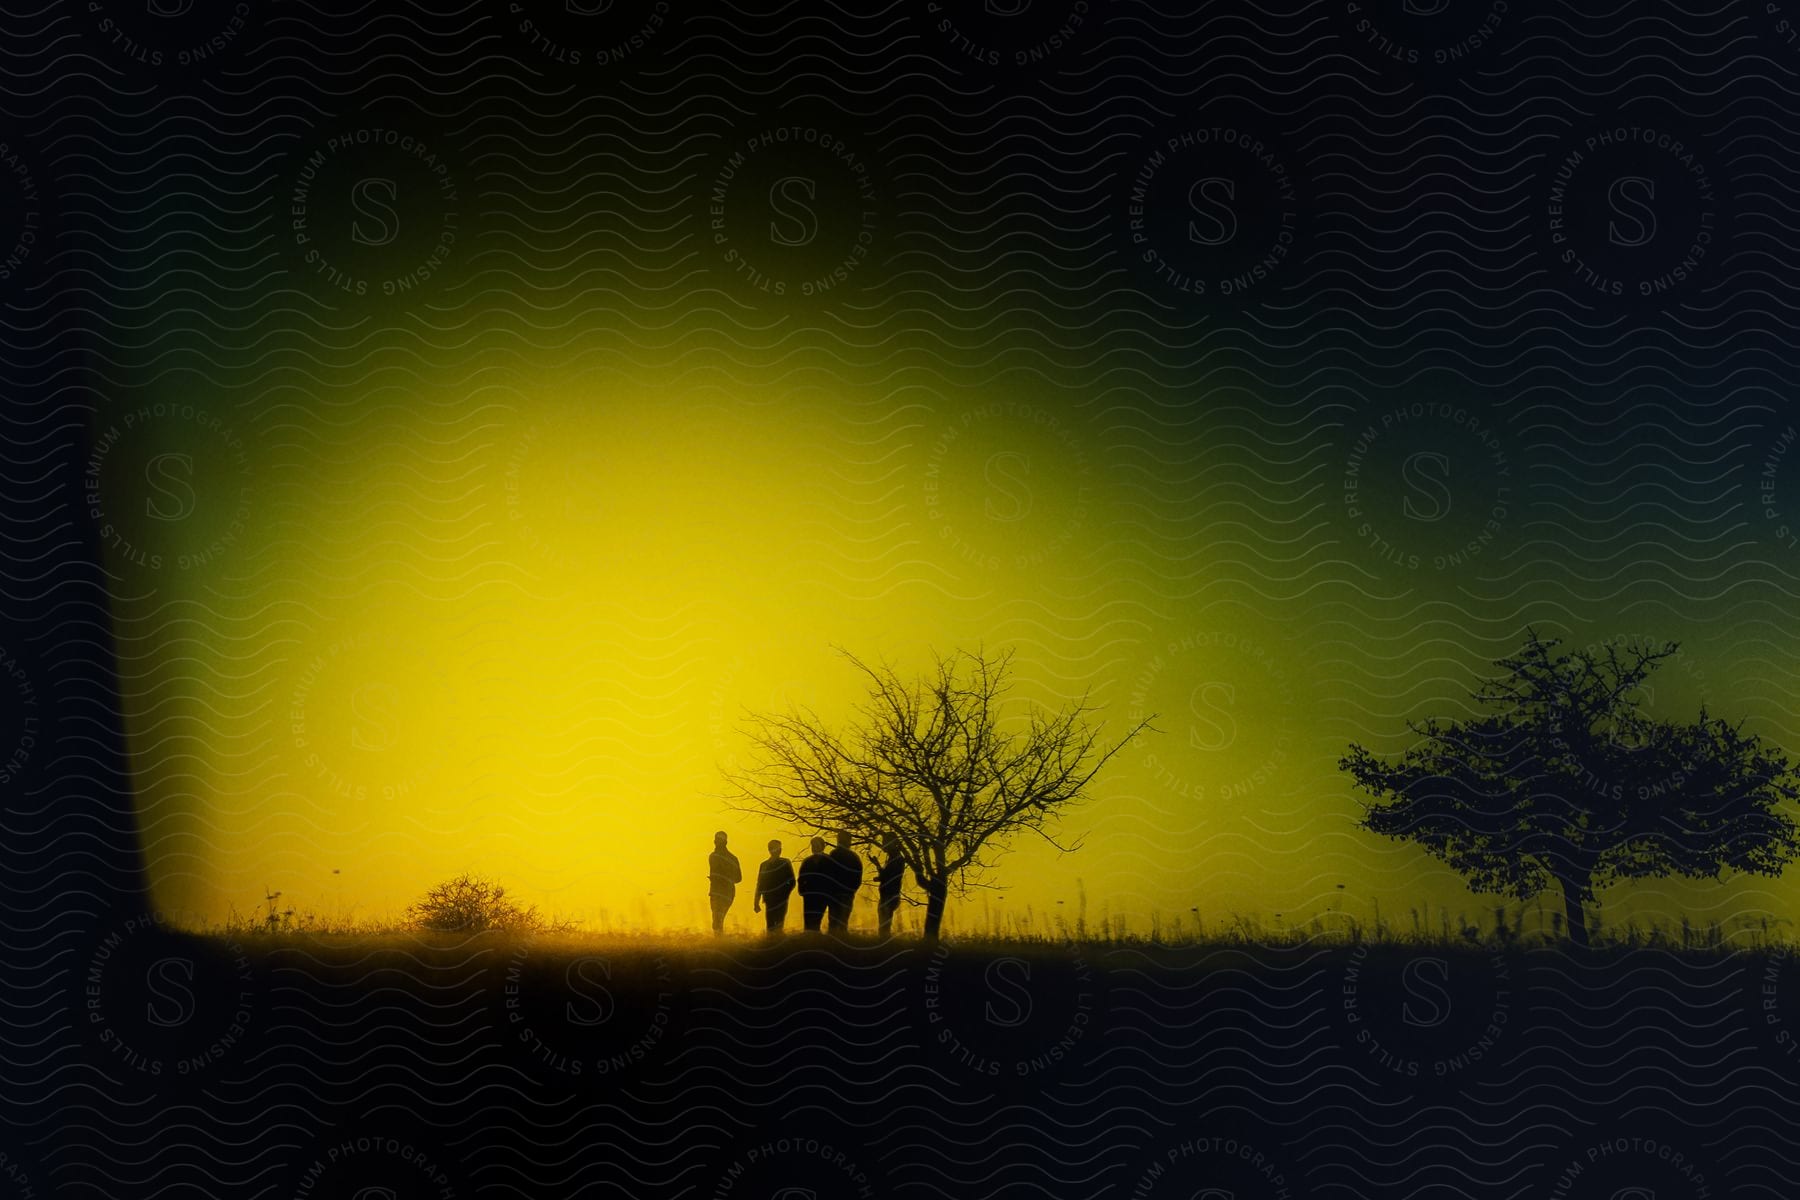 Four silhouettes of people standing in a field under a bare tree with a yellow dusk sky.